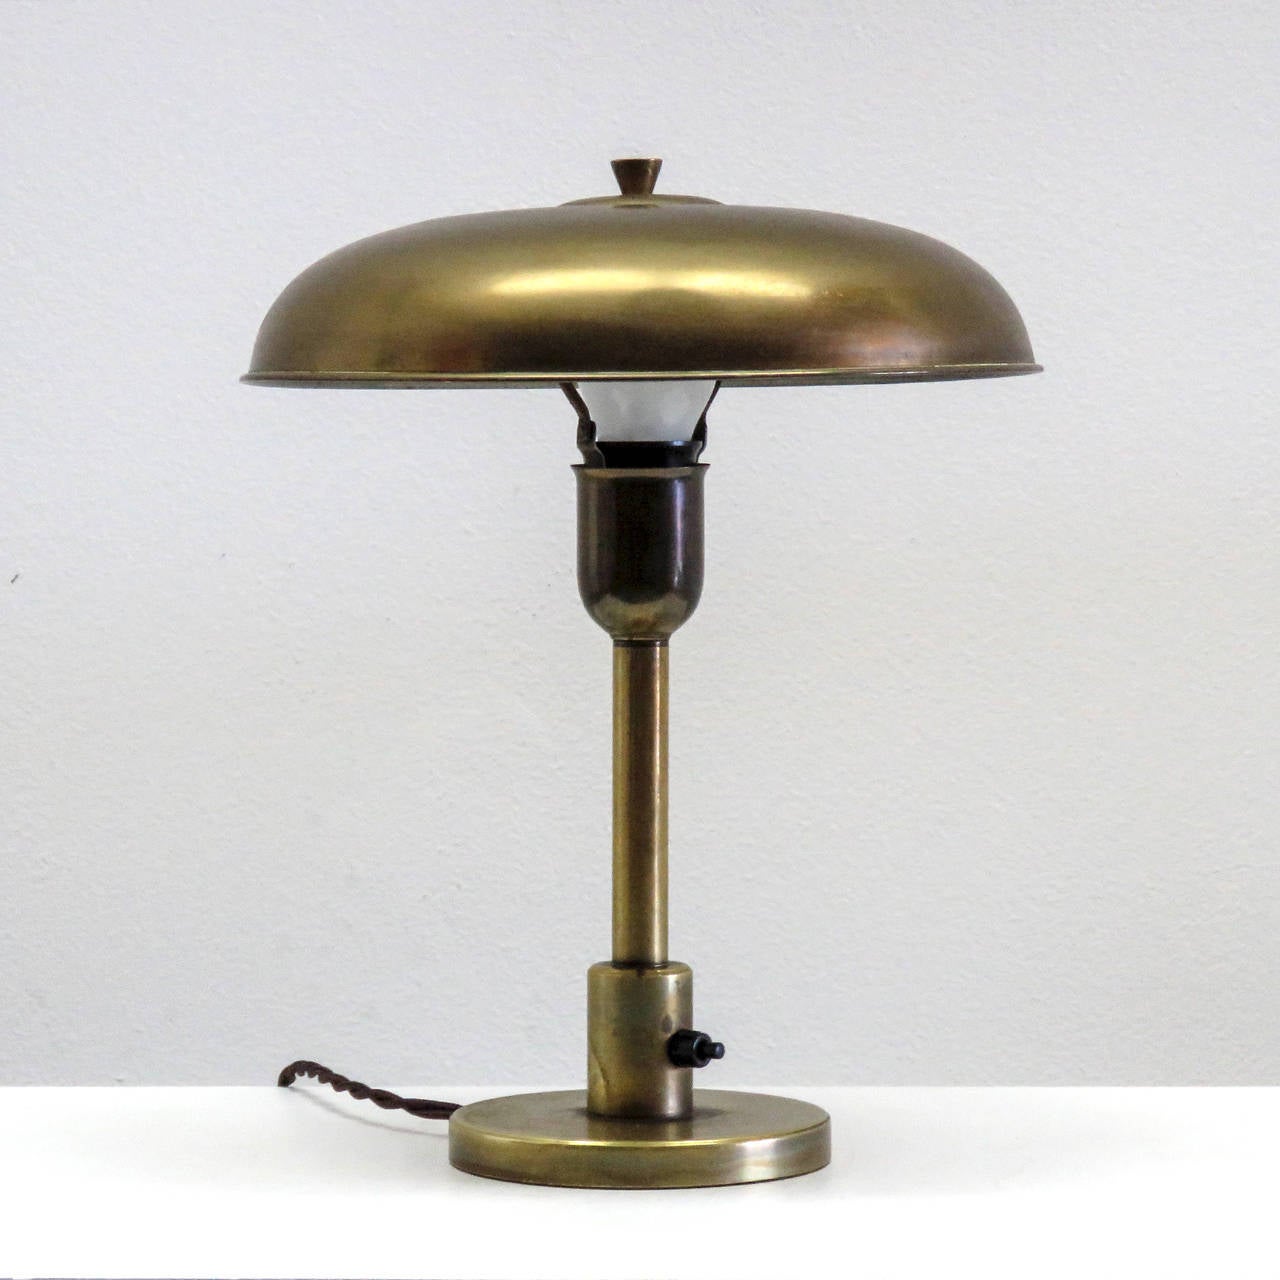 wonderful petite 1930s Danish table lamp in brass, with tilting shade and on/off switch at the stem.